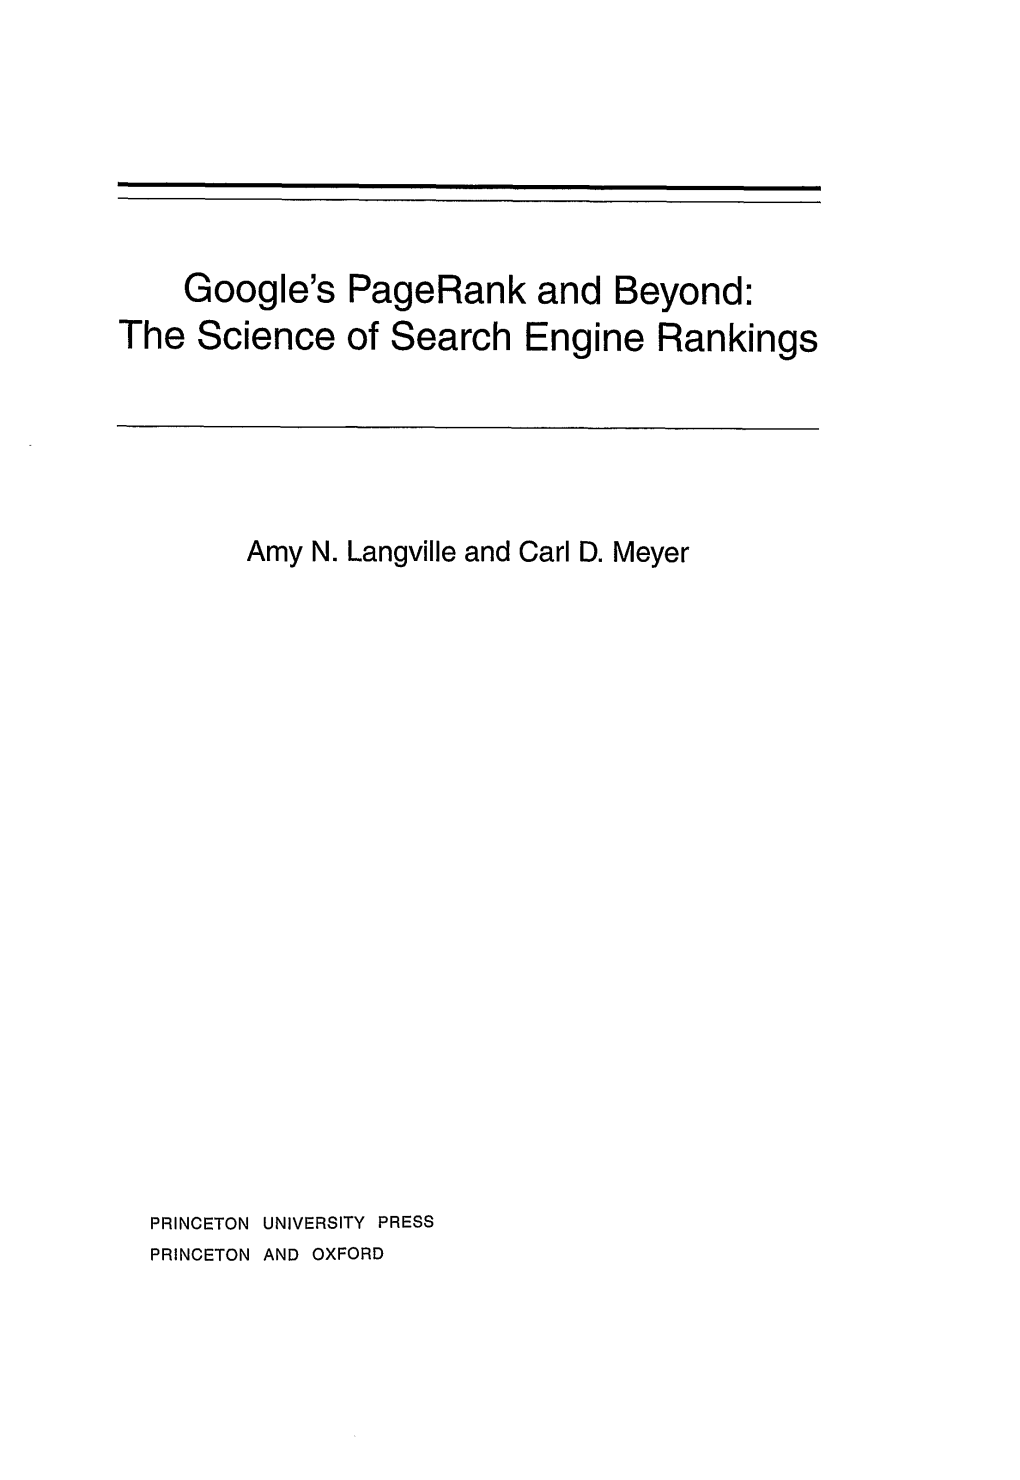 Google's Pagerank and Beyond: the Science of Search Engine Rankings